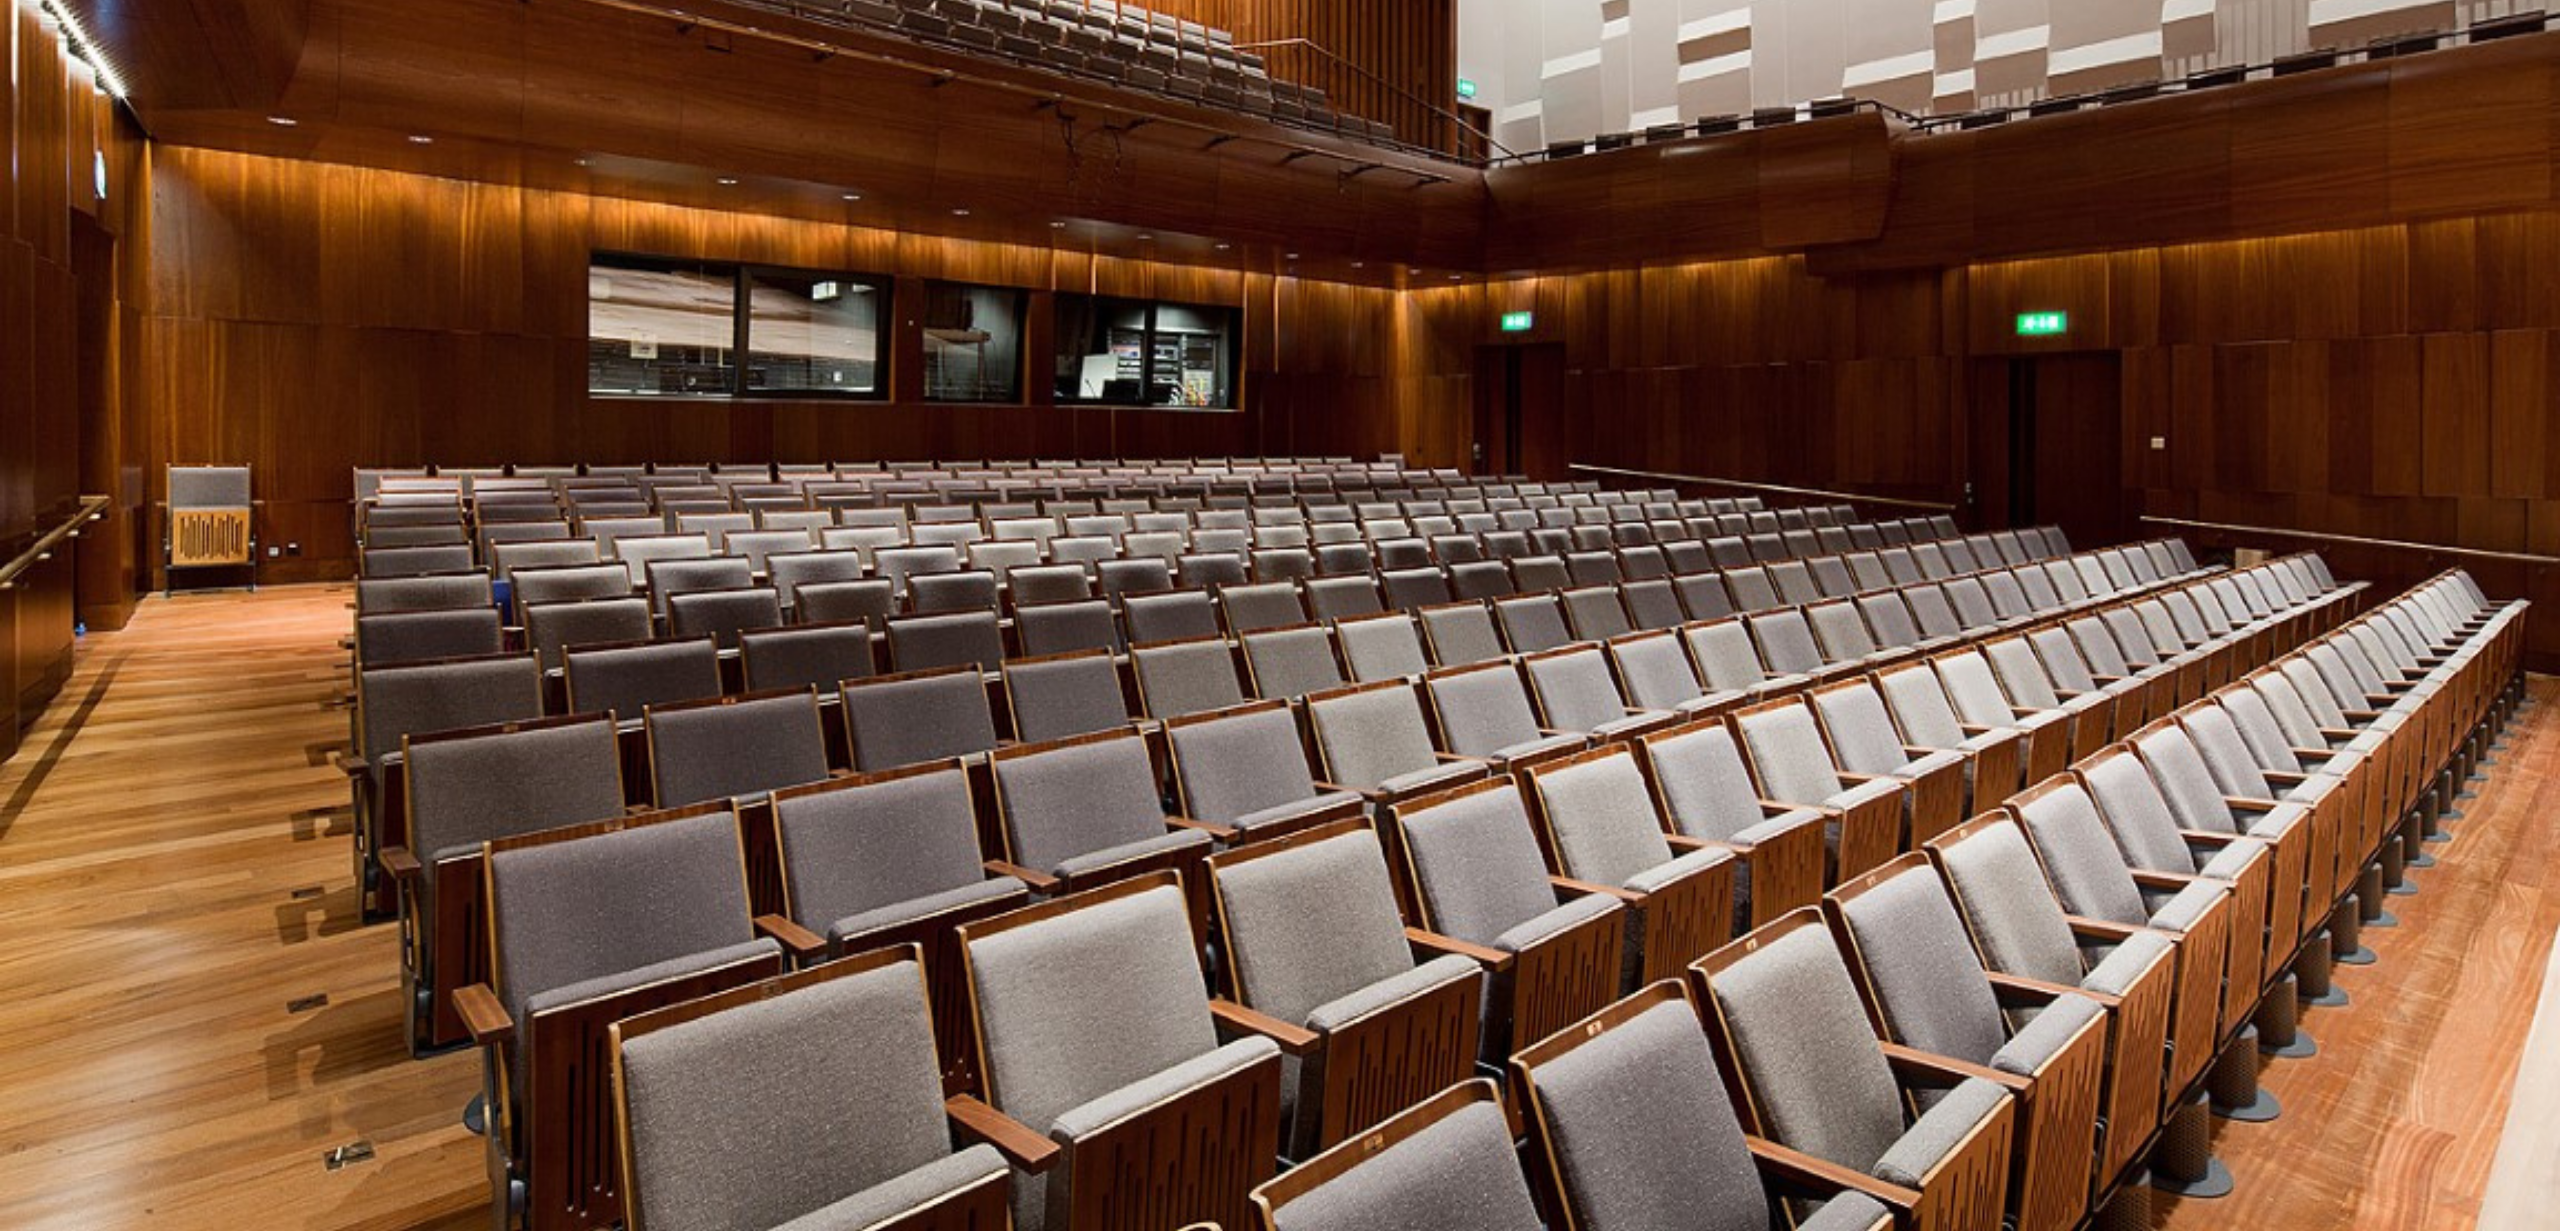 An auditorium with grey theater style seating